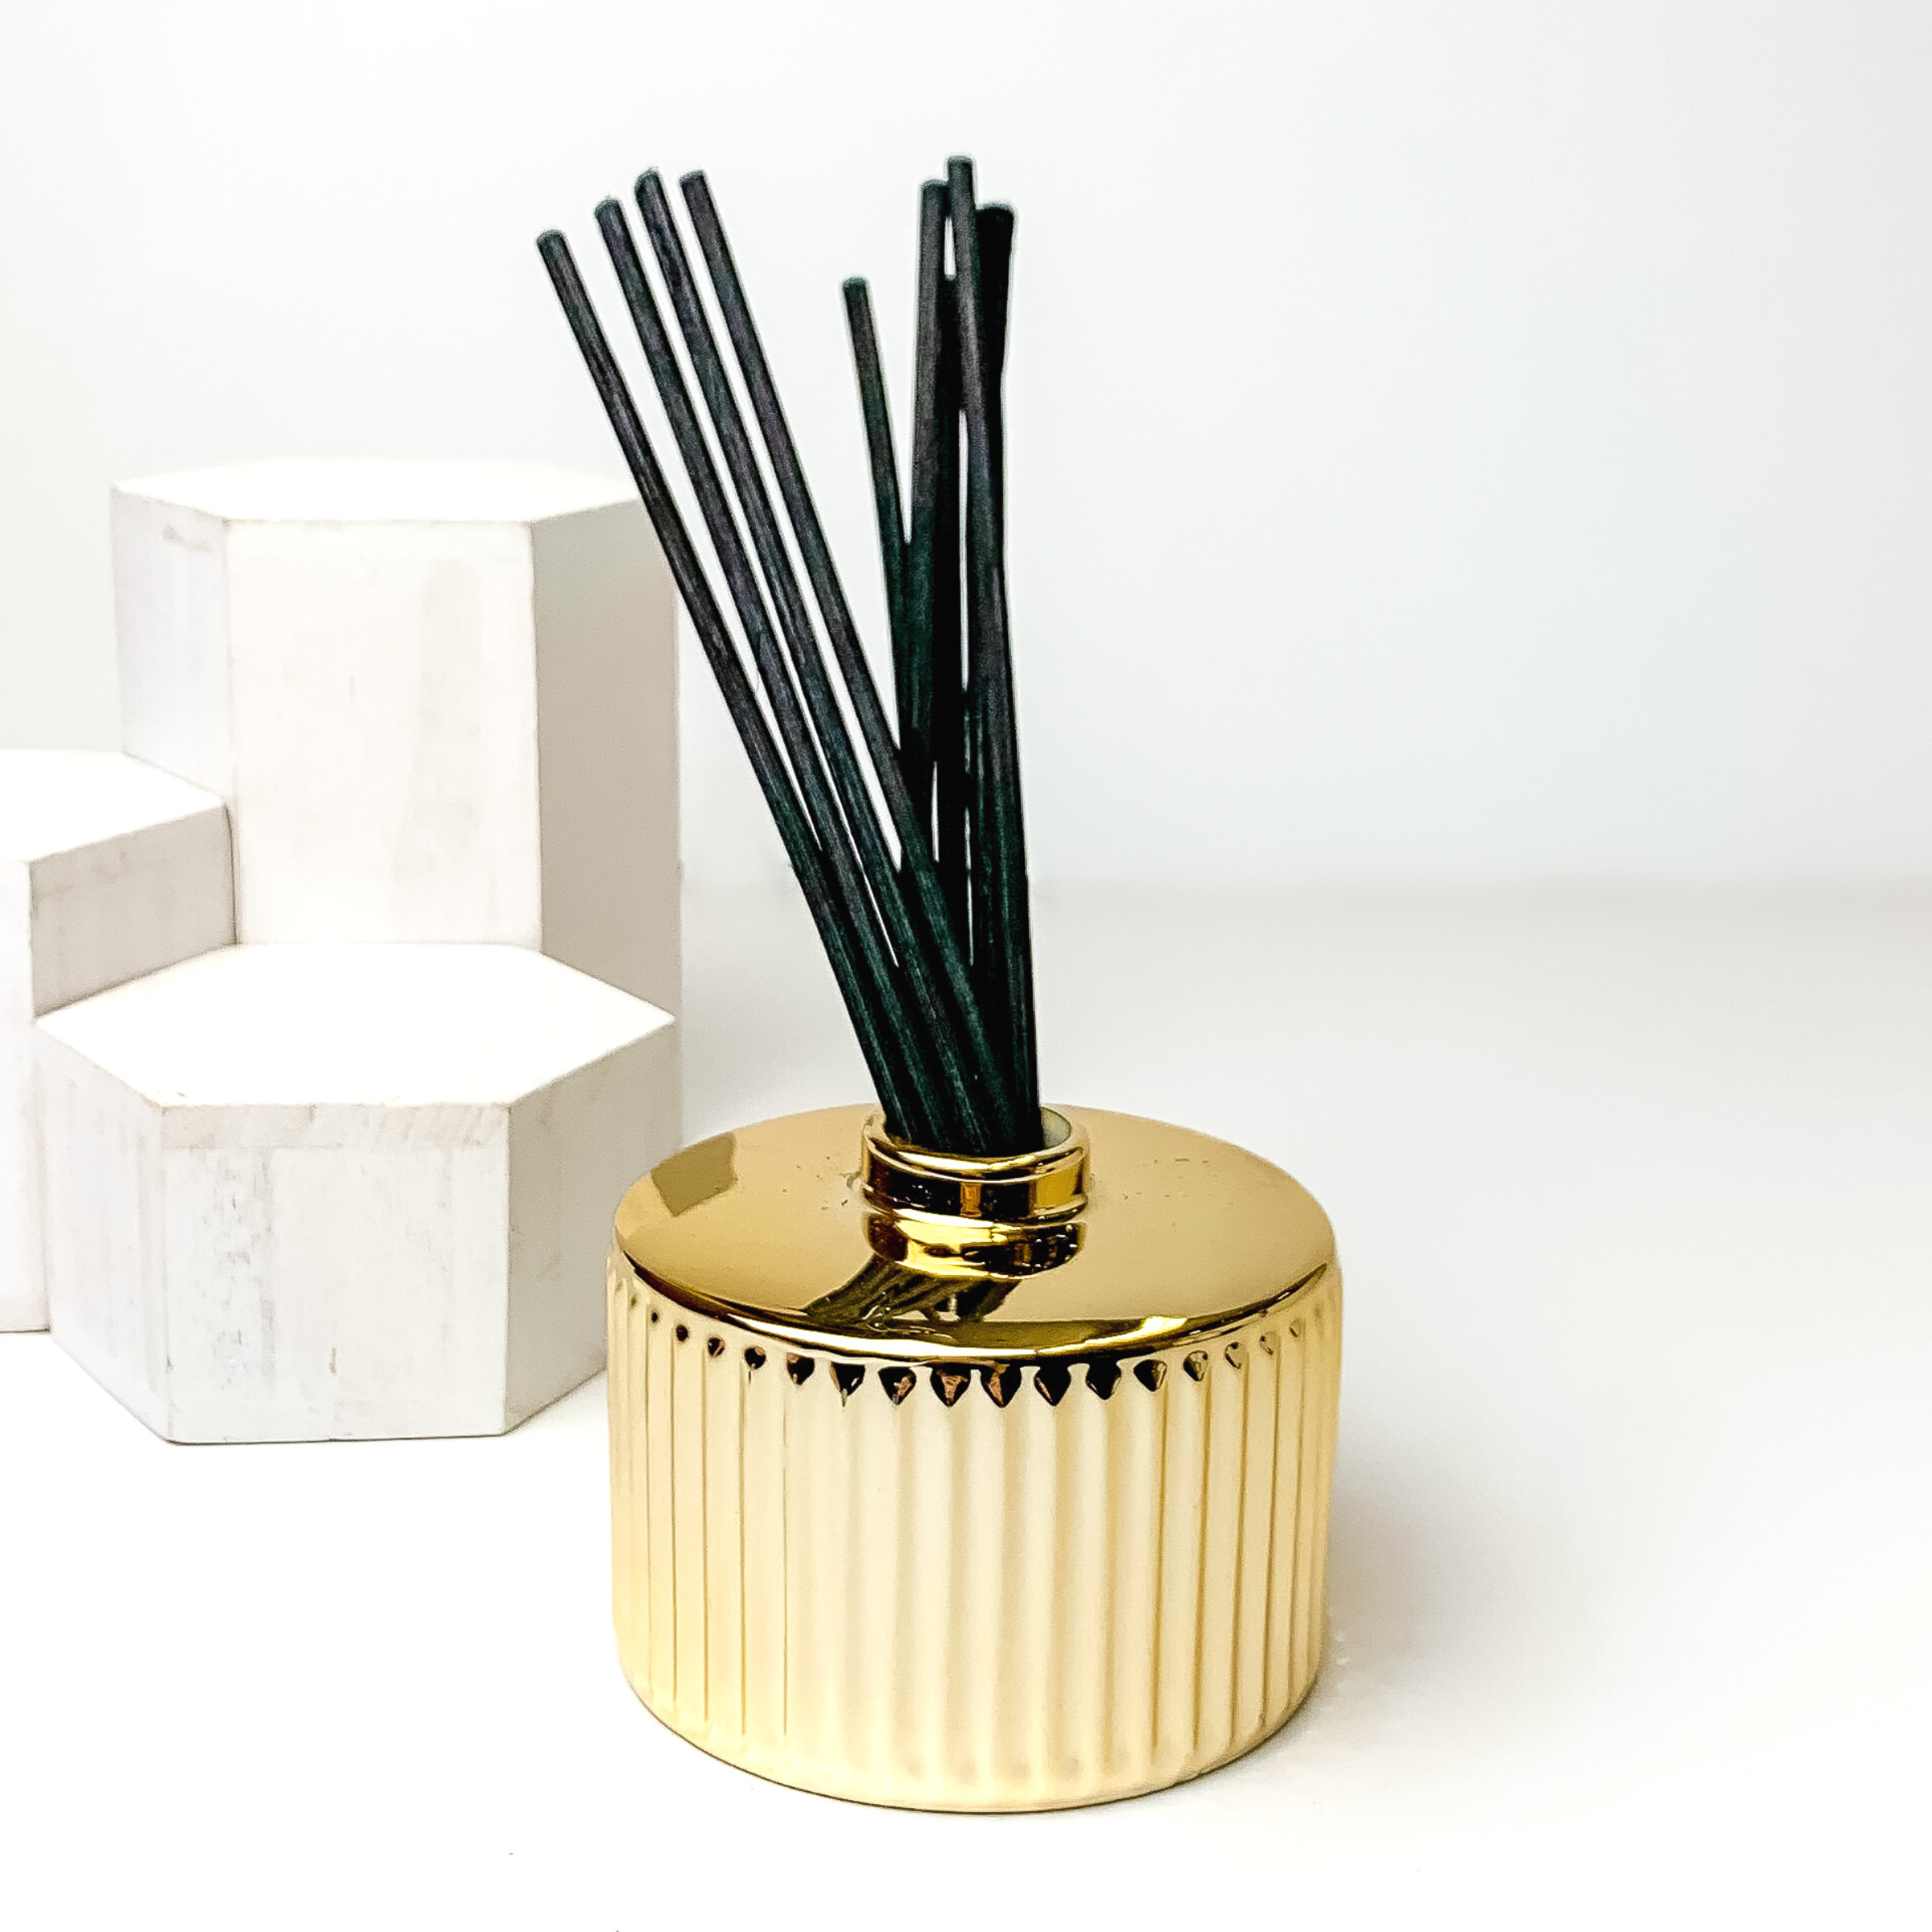 Gold diffuser holder with black reeds sticking out of the top. This diffuser is pictured on a white background with white blocks on the left side of the candle. 